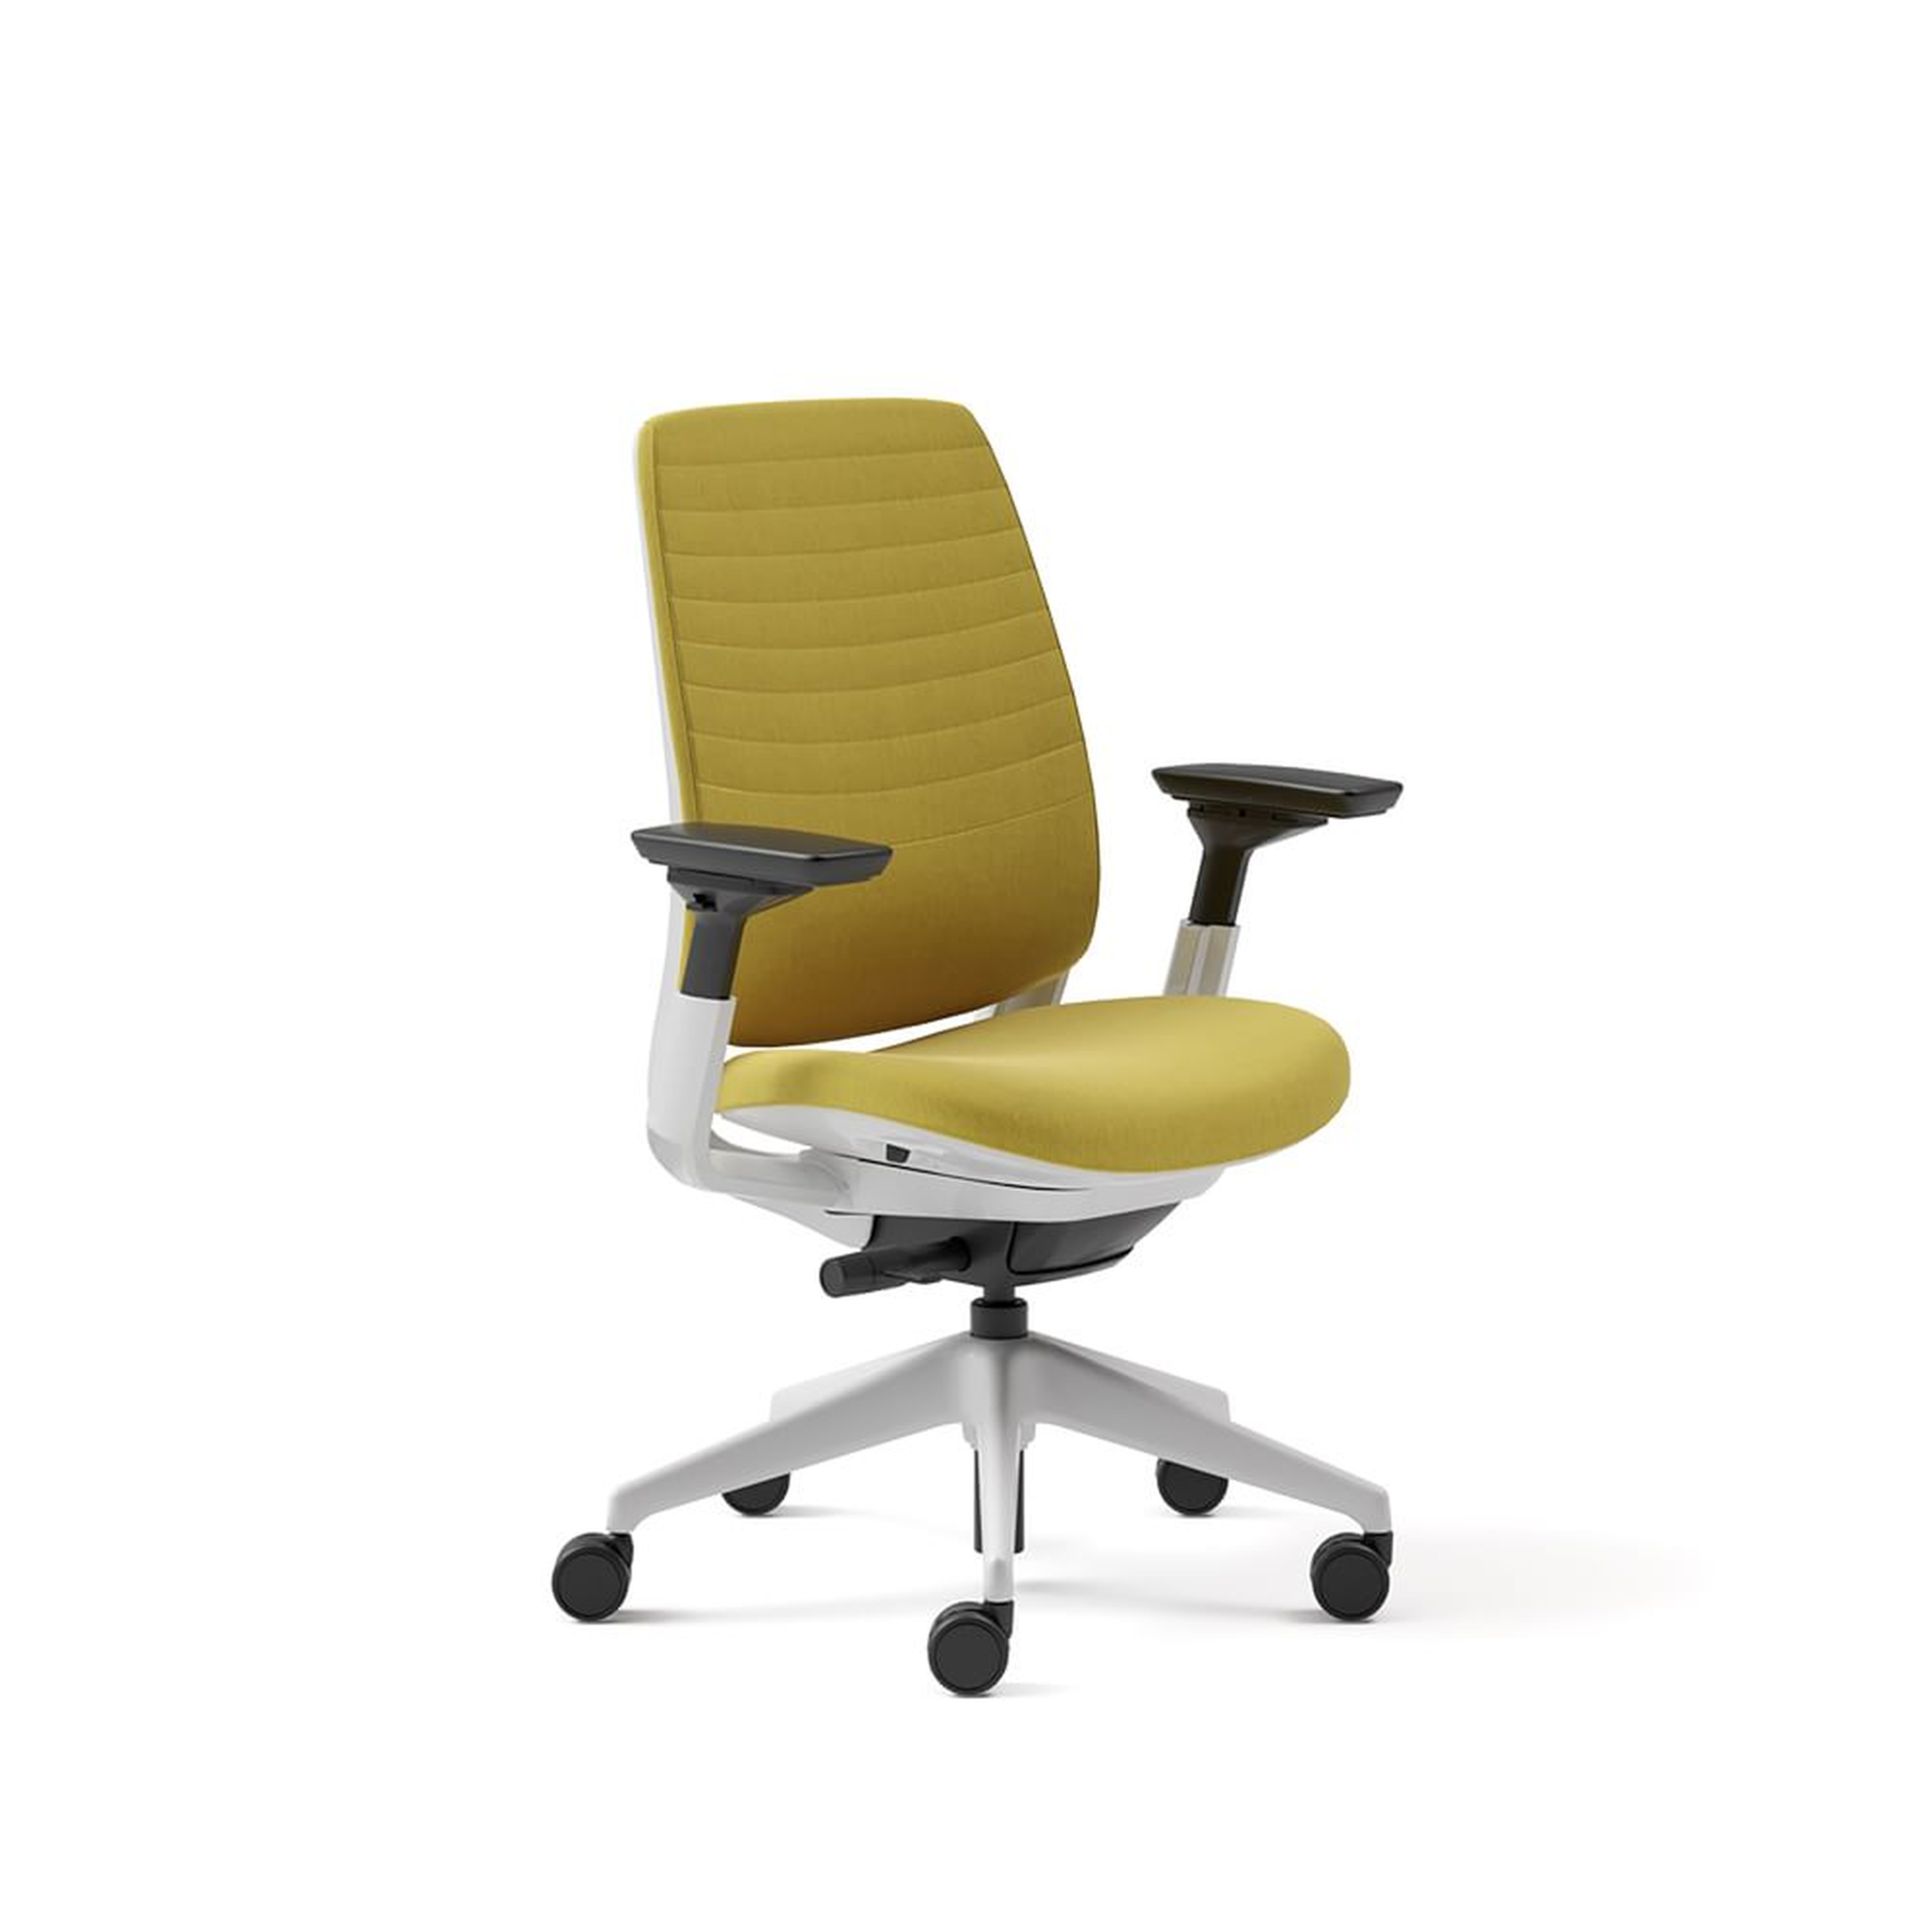 Steelcase Series 2 4-Way Armed Task Chair, Soft Casters Seagull Billiard Cloth; Citron - West Elm